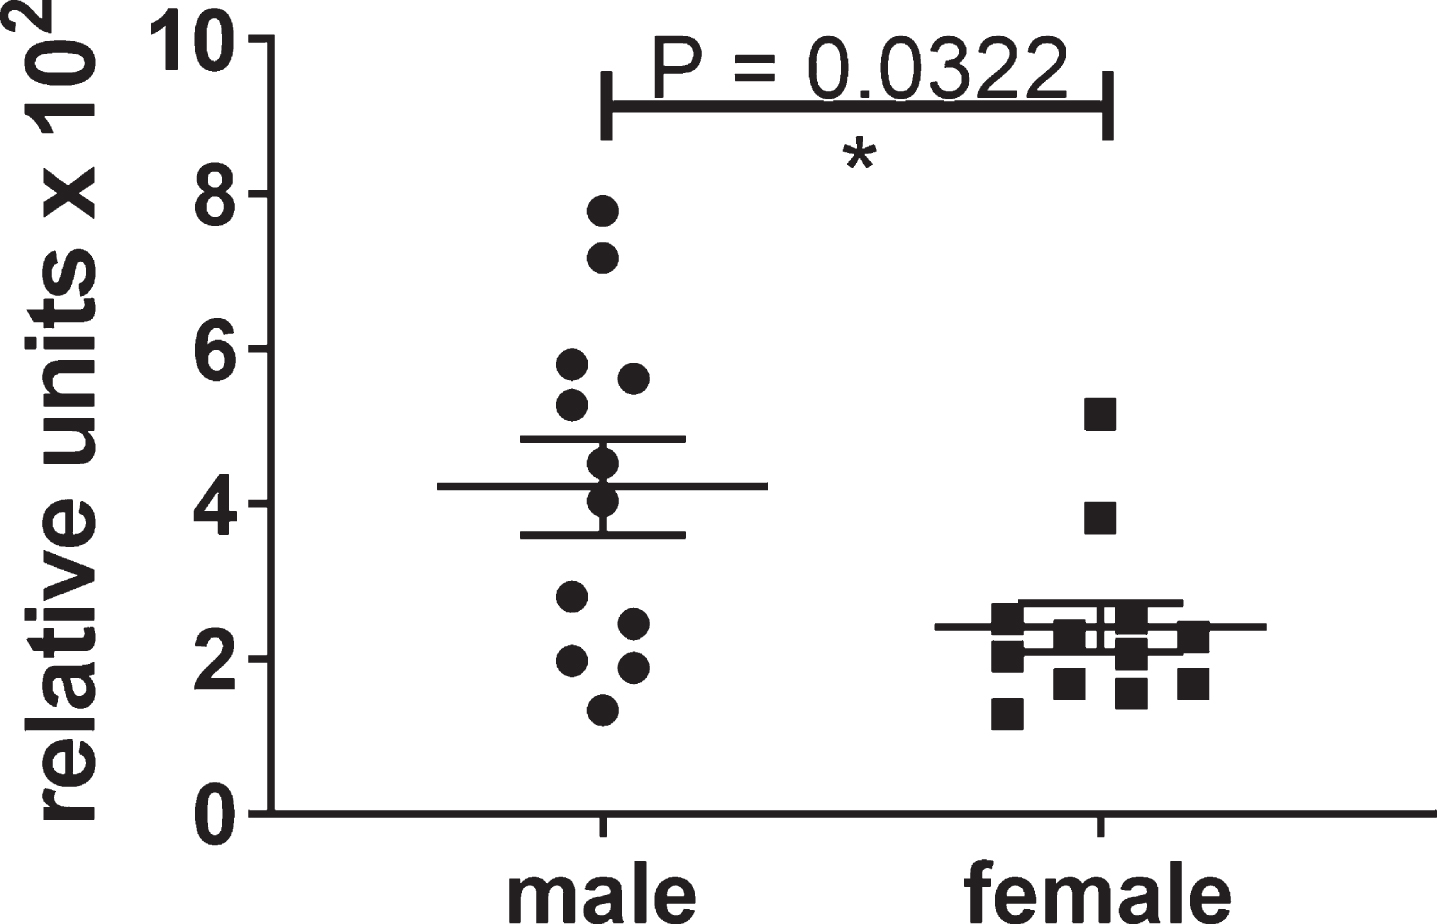 Differential levels of insoluble tau aggregates in untreated male and female htau mice at 6.5 months of age. These significant results show that the control group of male htau mice developed about twice the level of insoluble tau aggregates as the female control group at the end of the study. This justified the separate analyses of the male mice which developed enough insoluble tau to determine the efficacy of the lead compound. The levels of Sarkosyl-insoluble tau aggregates were determined by ELISA for total tau formatted with capture antibody DA31 (pan-tau) and reporter Ab DA9 (pan-tau) conjugated to HRP. The values were normalized to total tau in the heat stable fractions of forebrain.